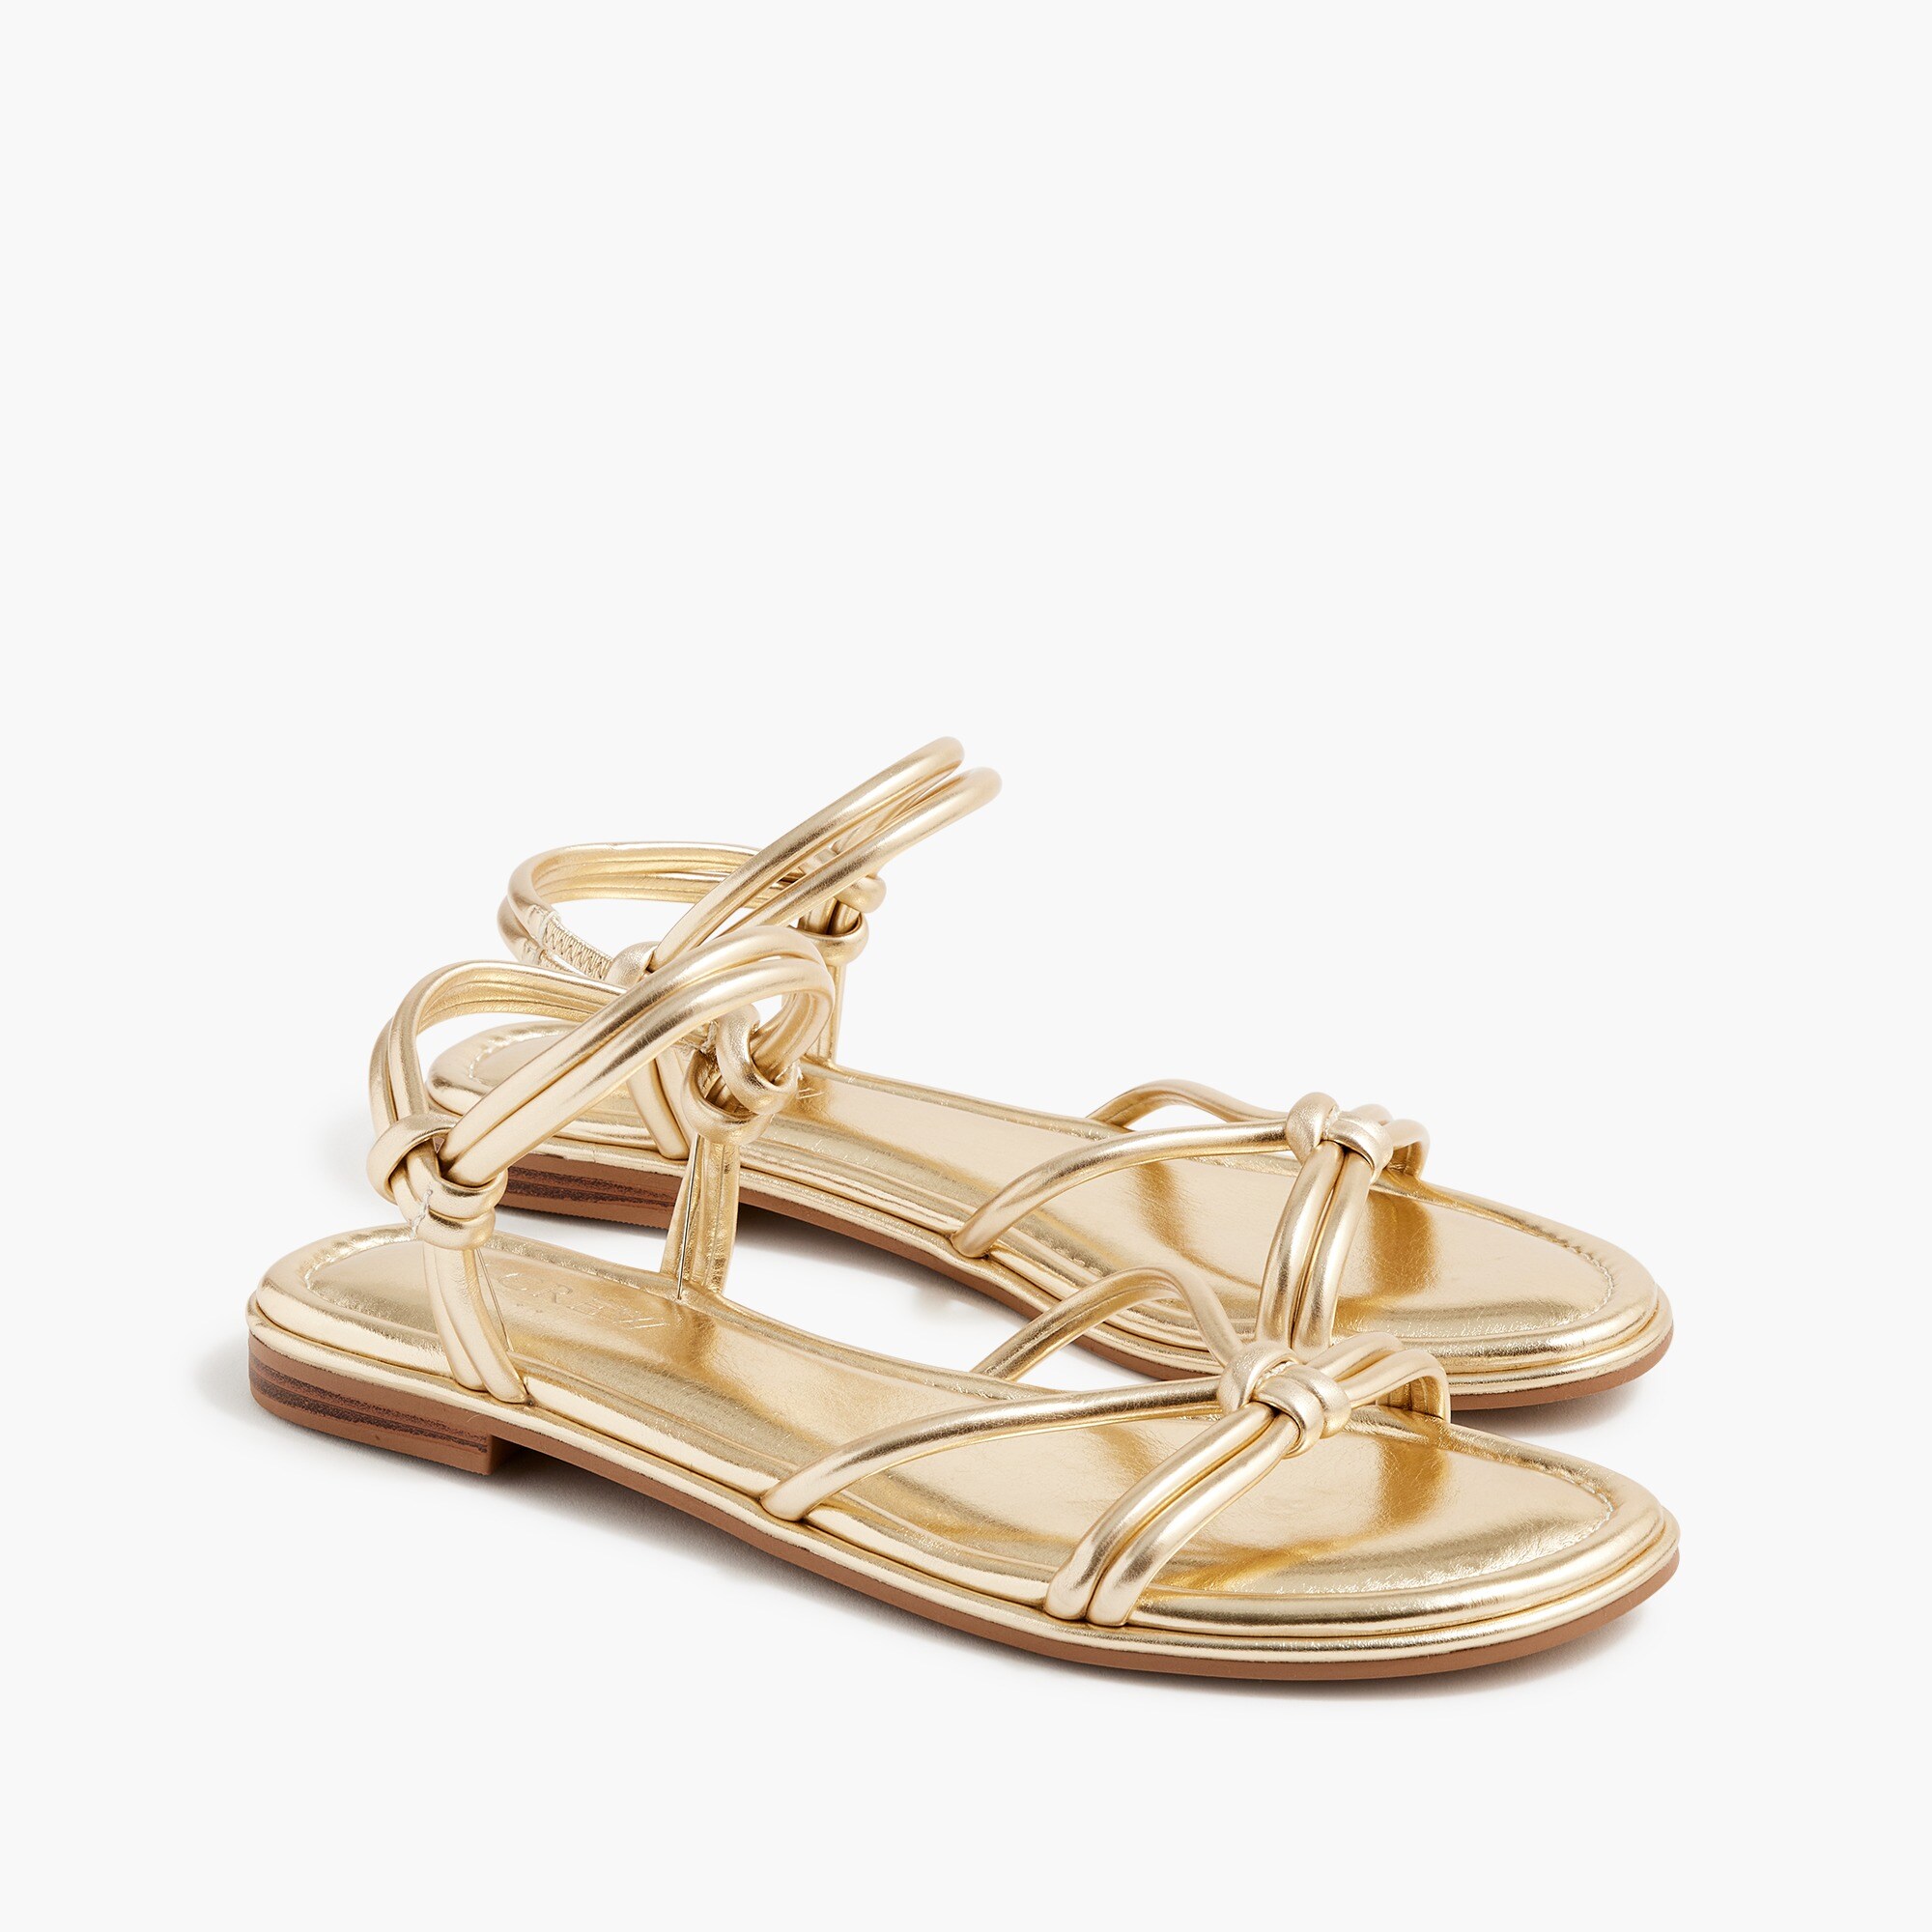  Knotted ankle-strap sandals